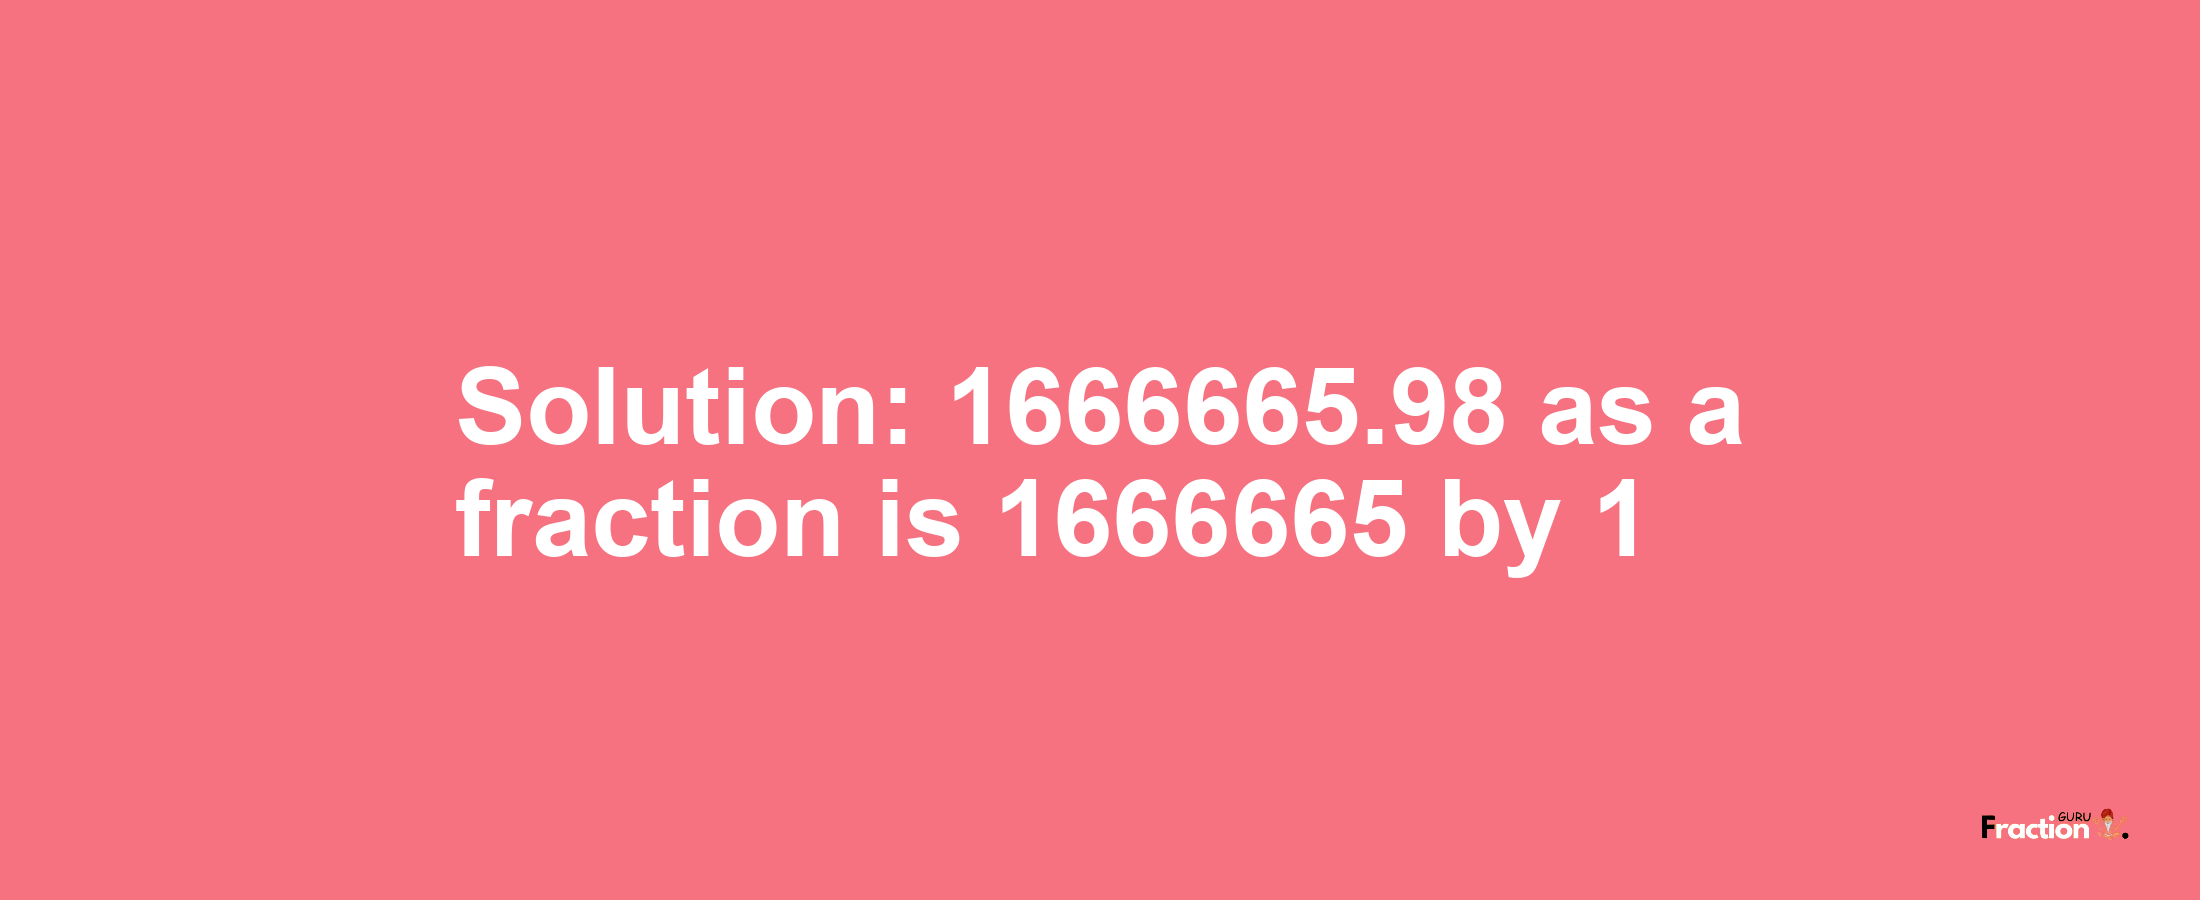 Solution:1666665.98 as a fraction is 1666665/1